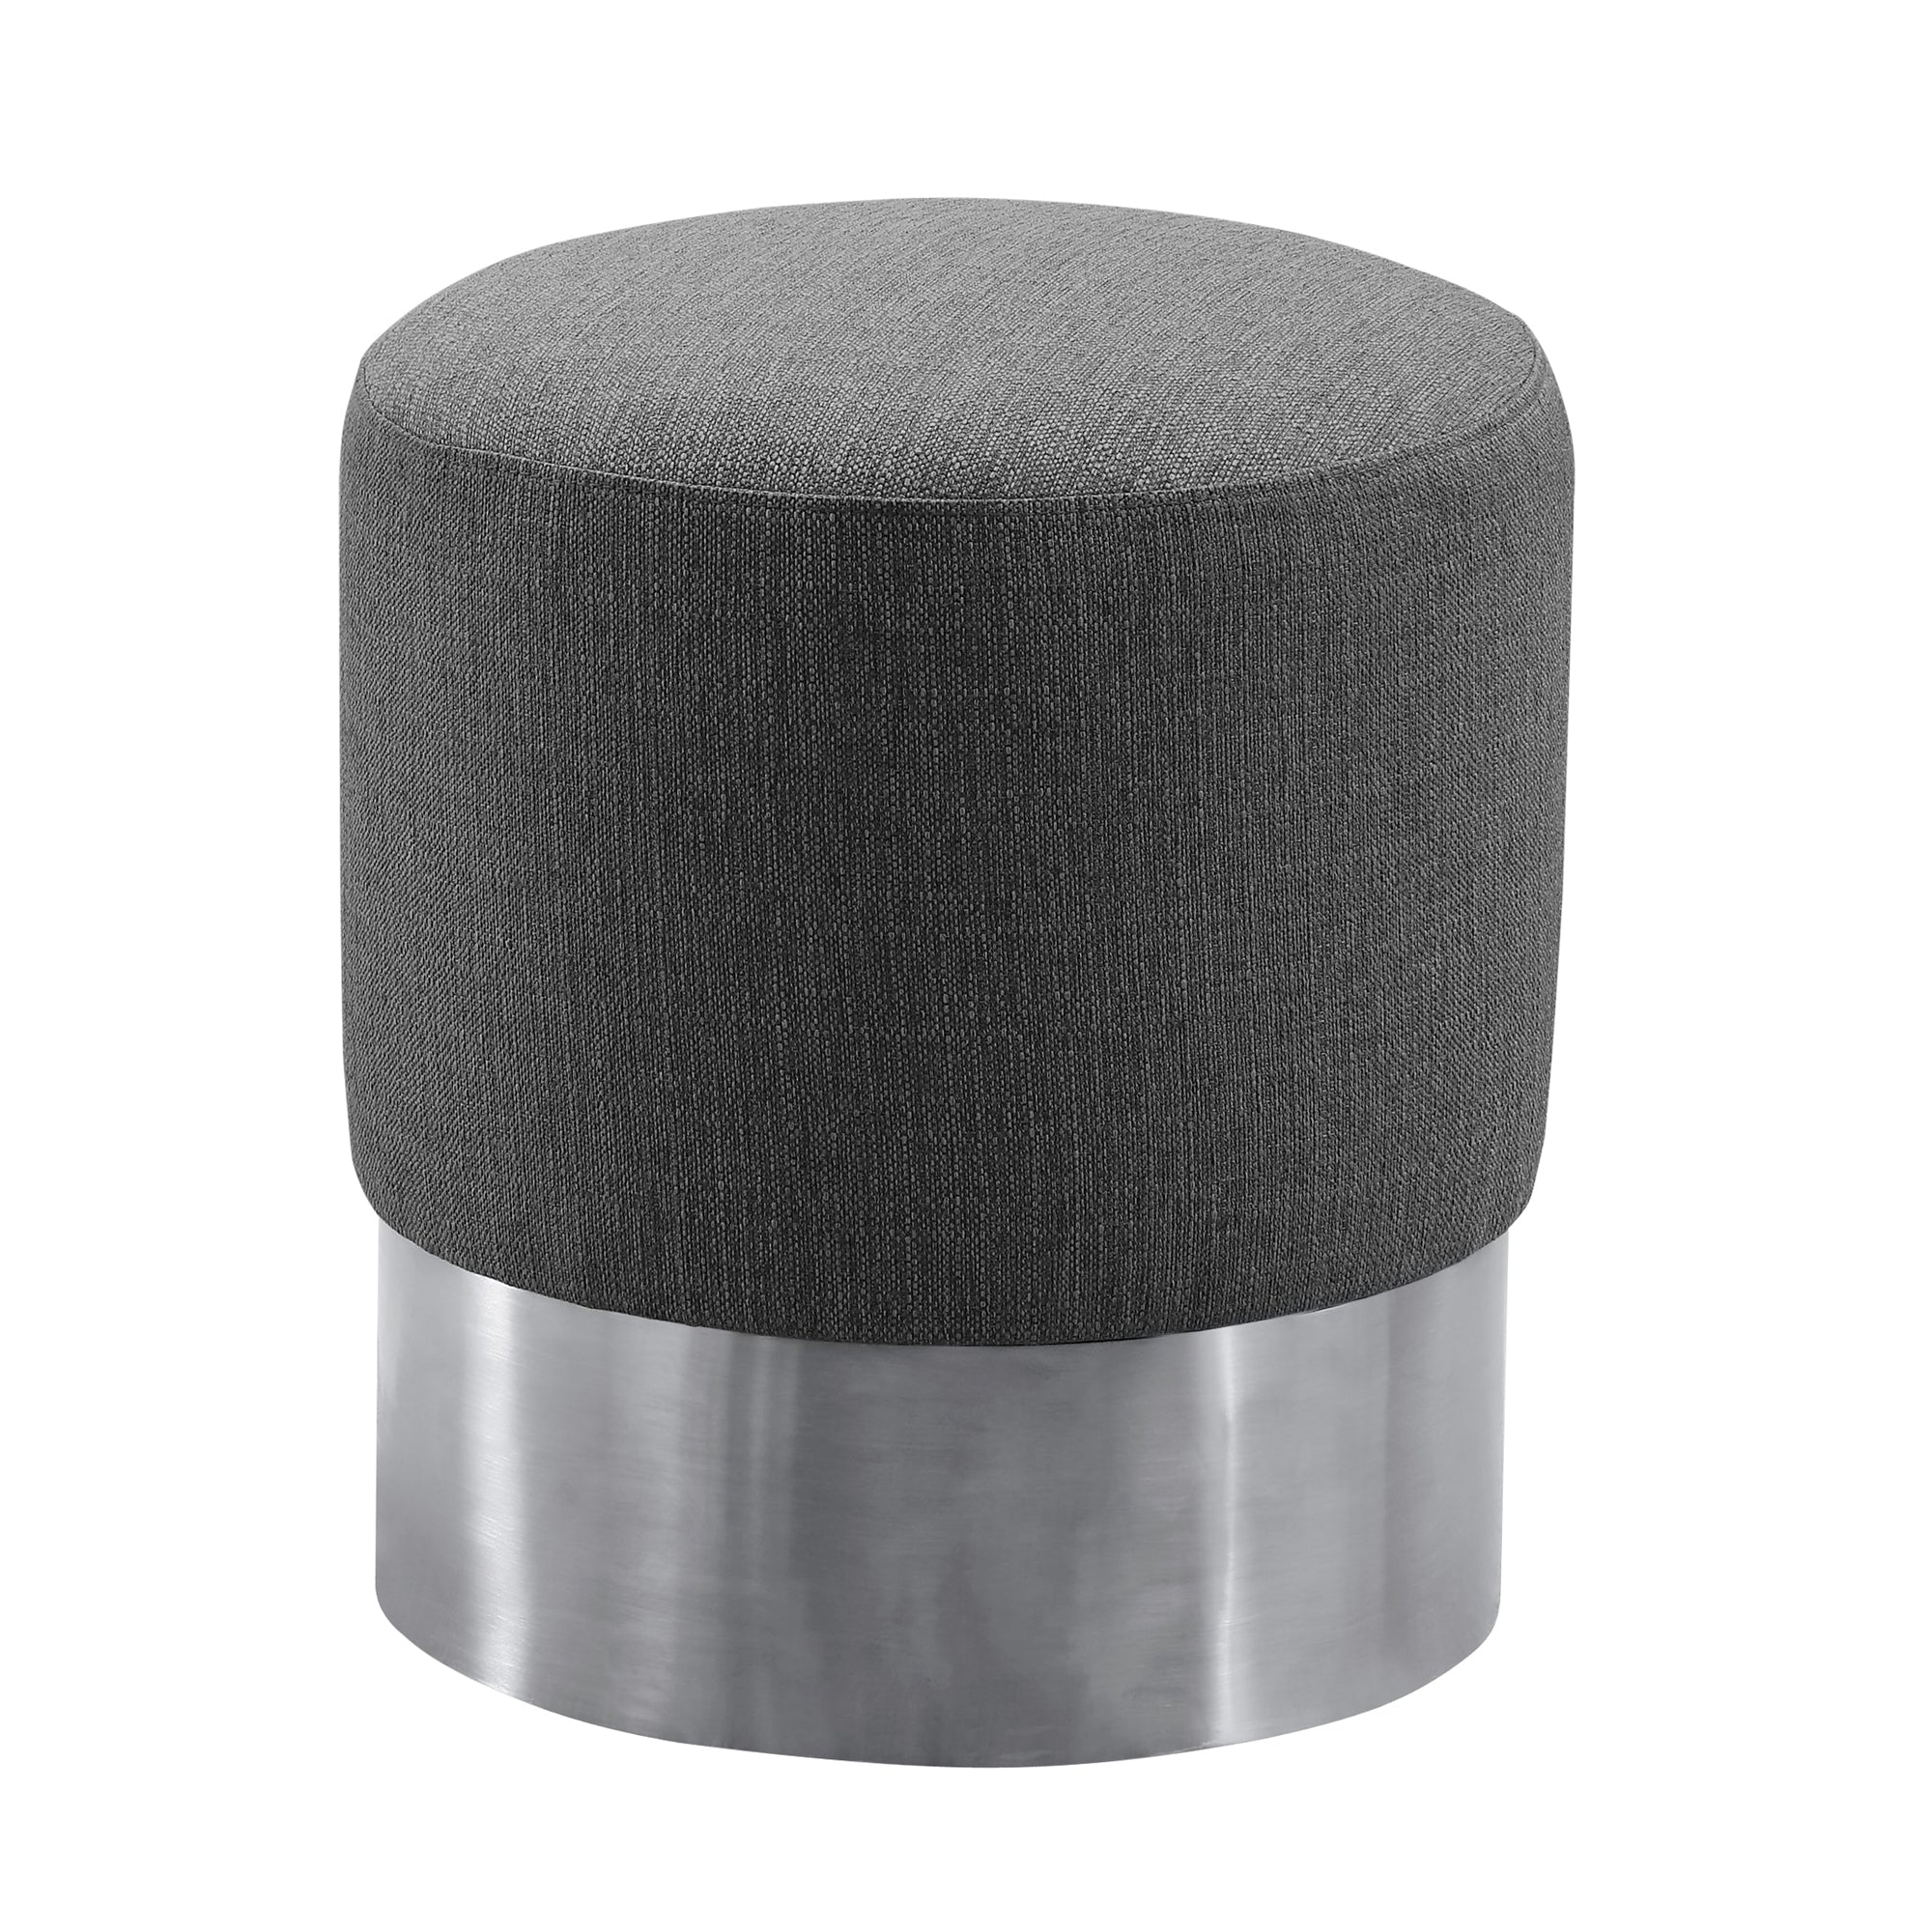 Armen Living Lctbotgrey Tabitha Contemporary Round Ottoman In Brushed Stainless Steel With Grey Fabric